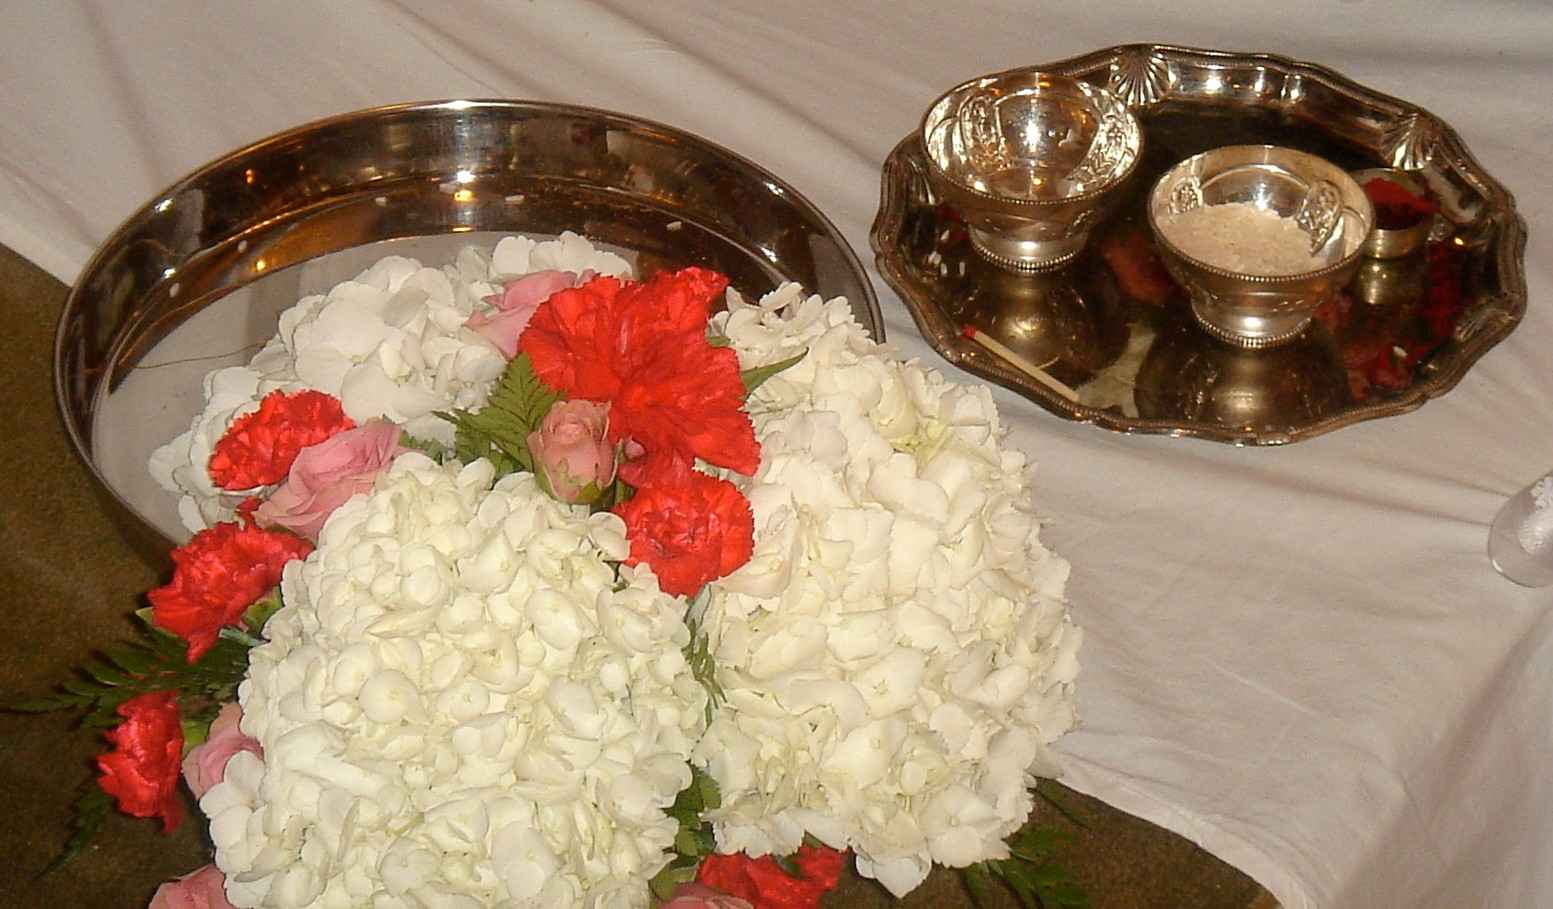 Trays containing rose petal<br>and other items